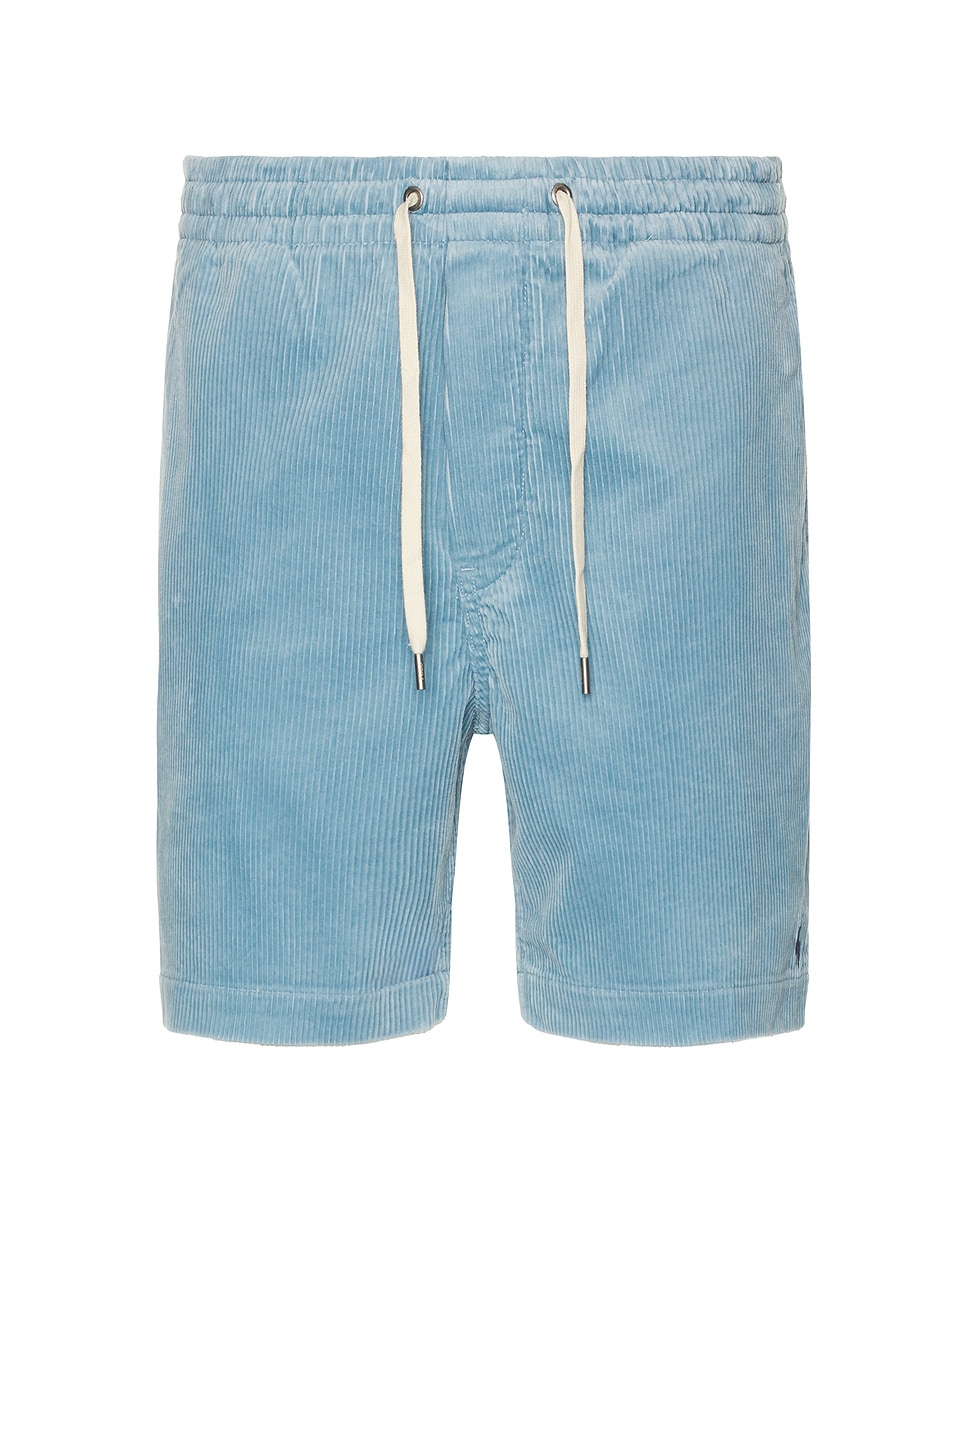 Image 1 of Polo Ralph Lauren Corduroy Prepster Short in Blue Note